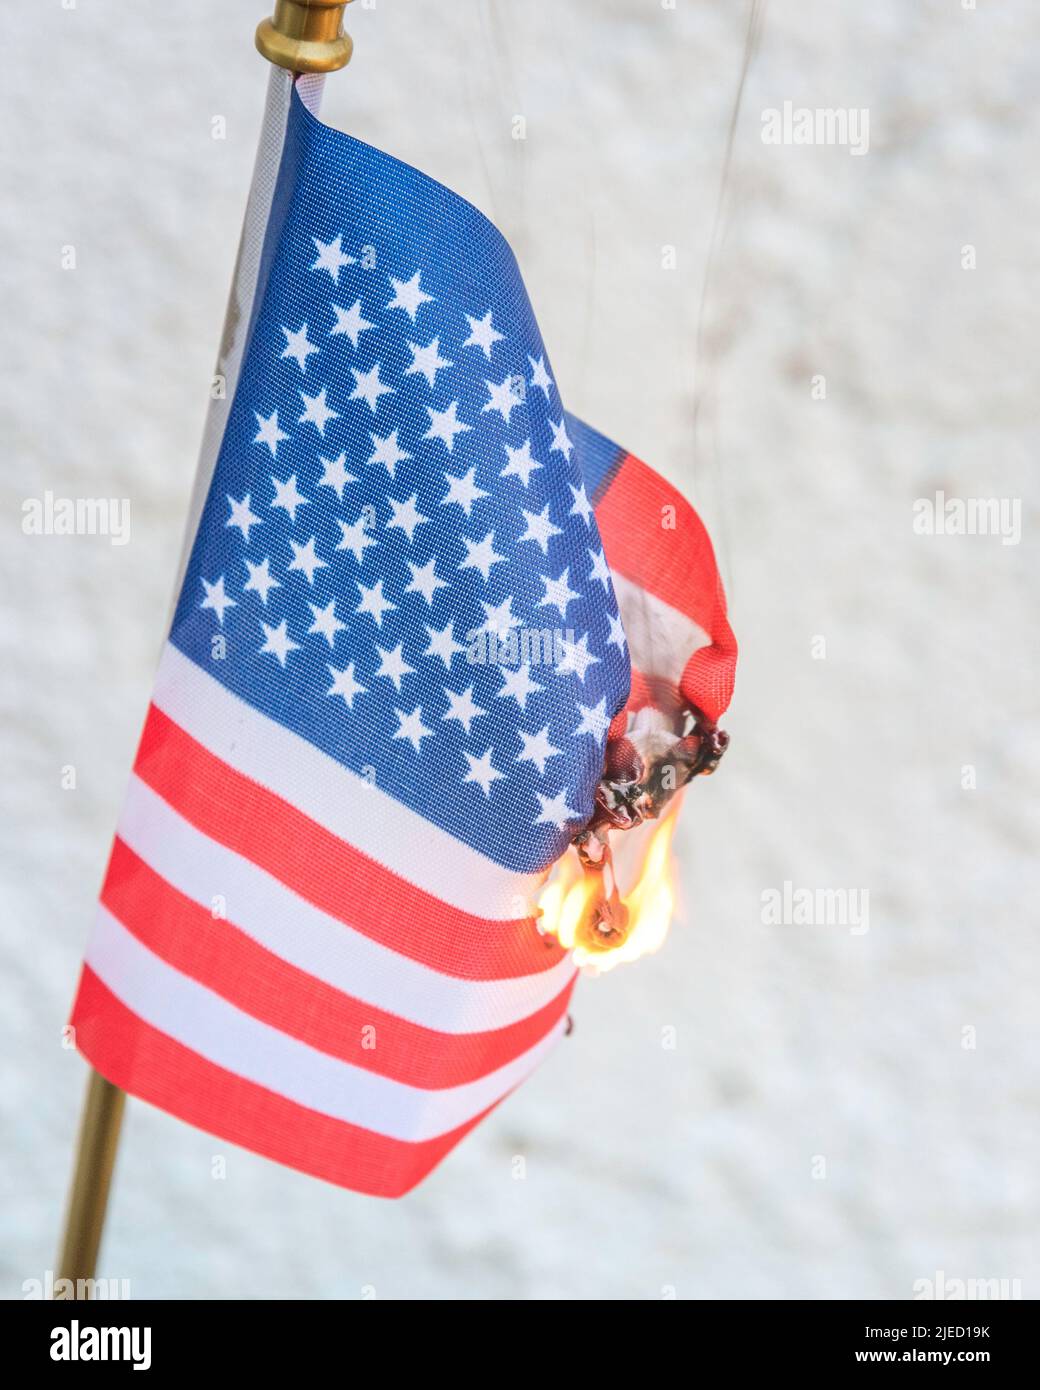 Close up of an American flag in flames. Stock Photo